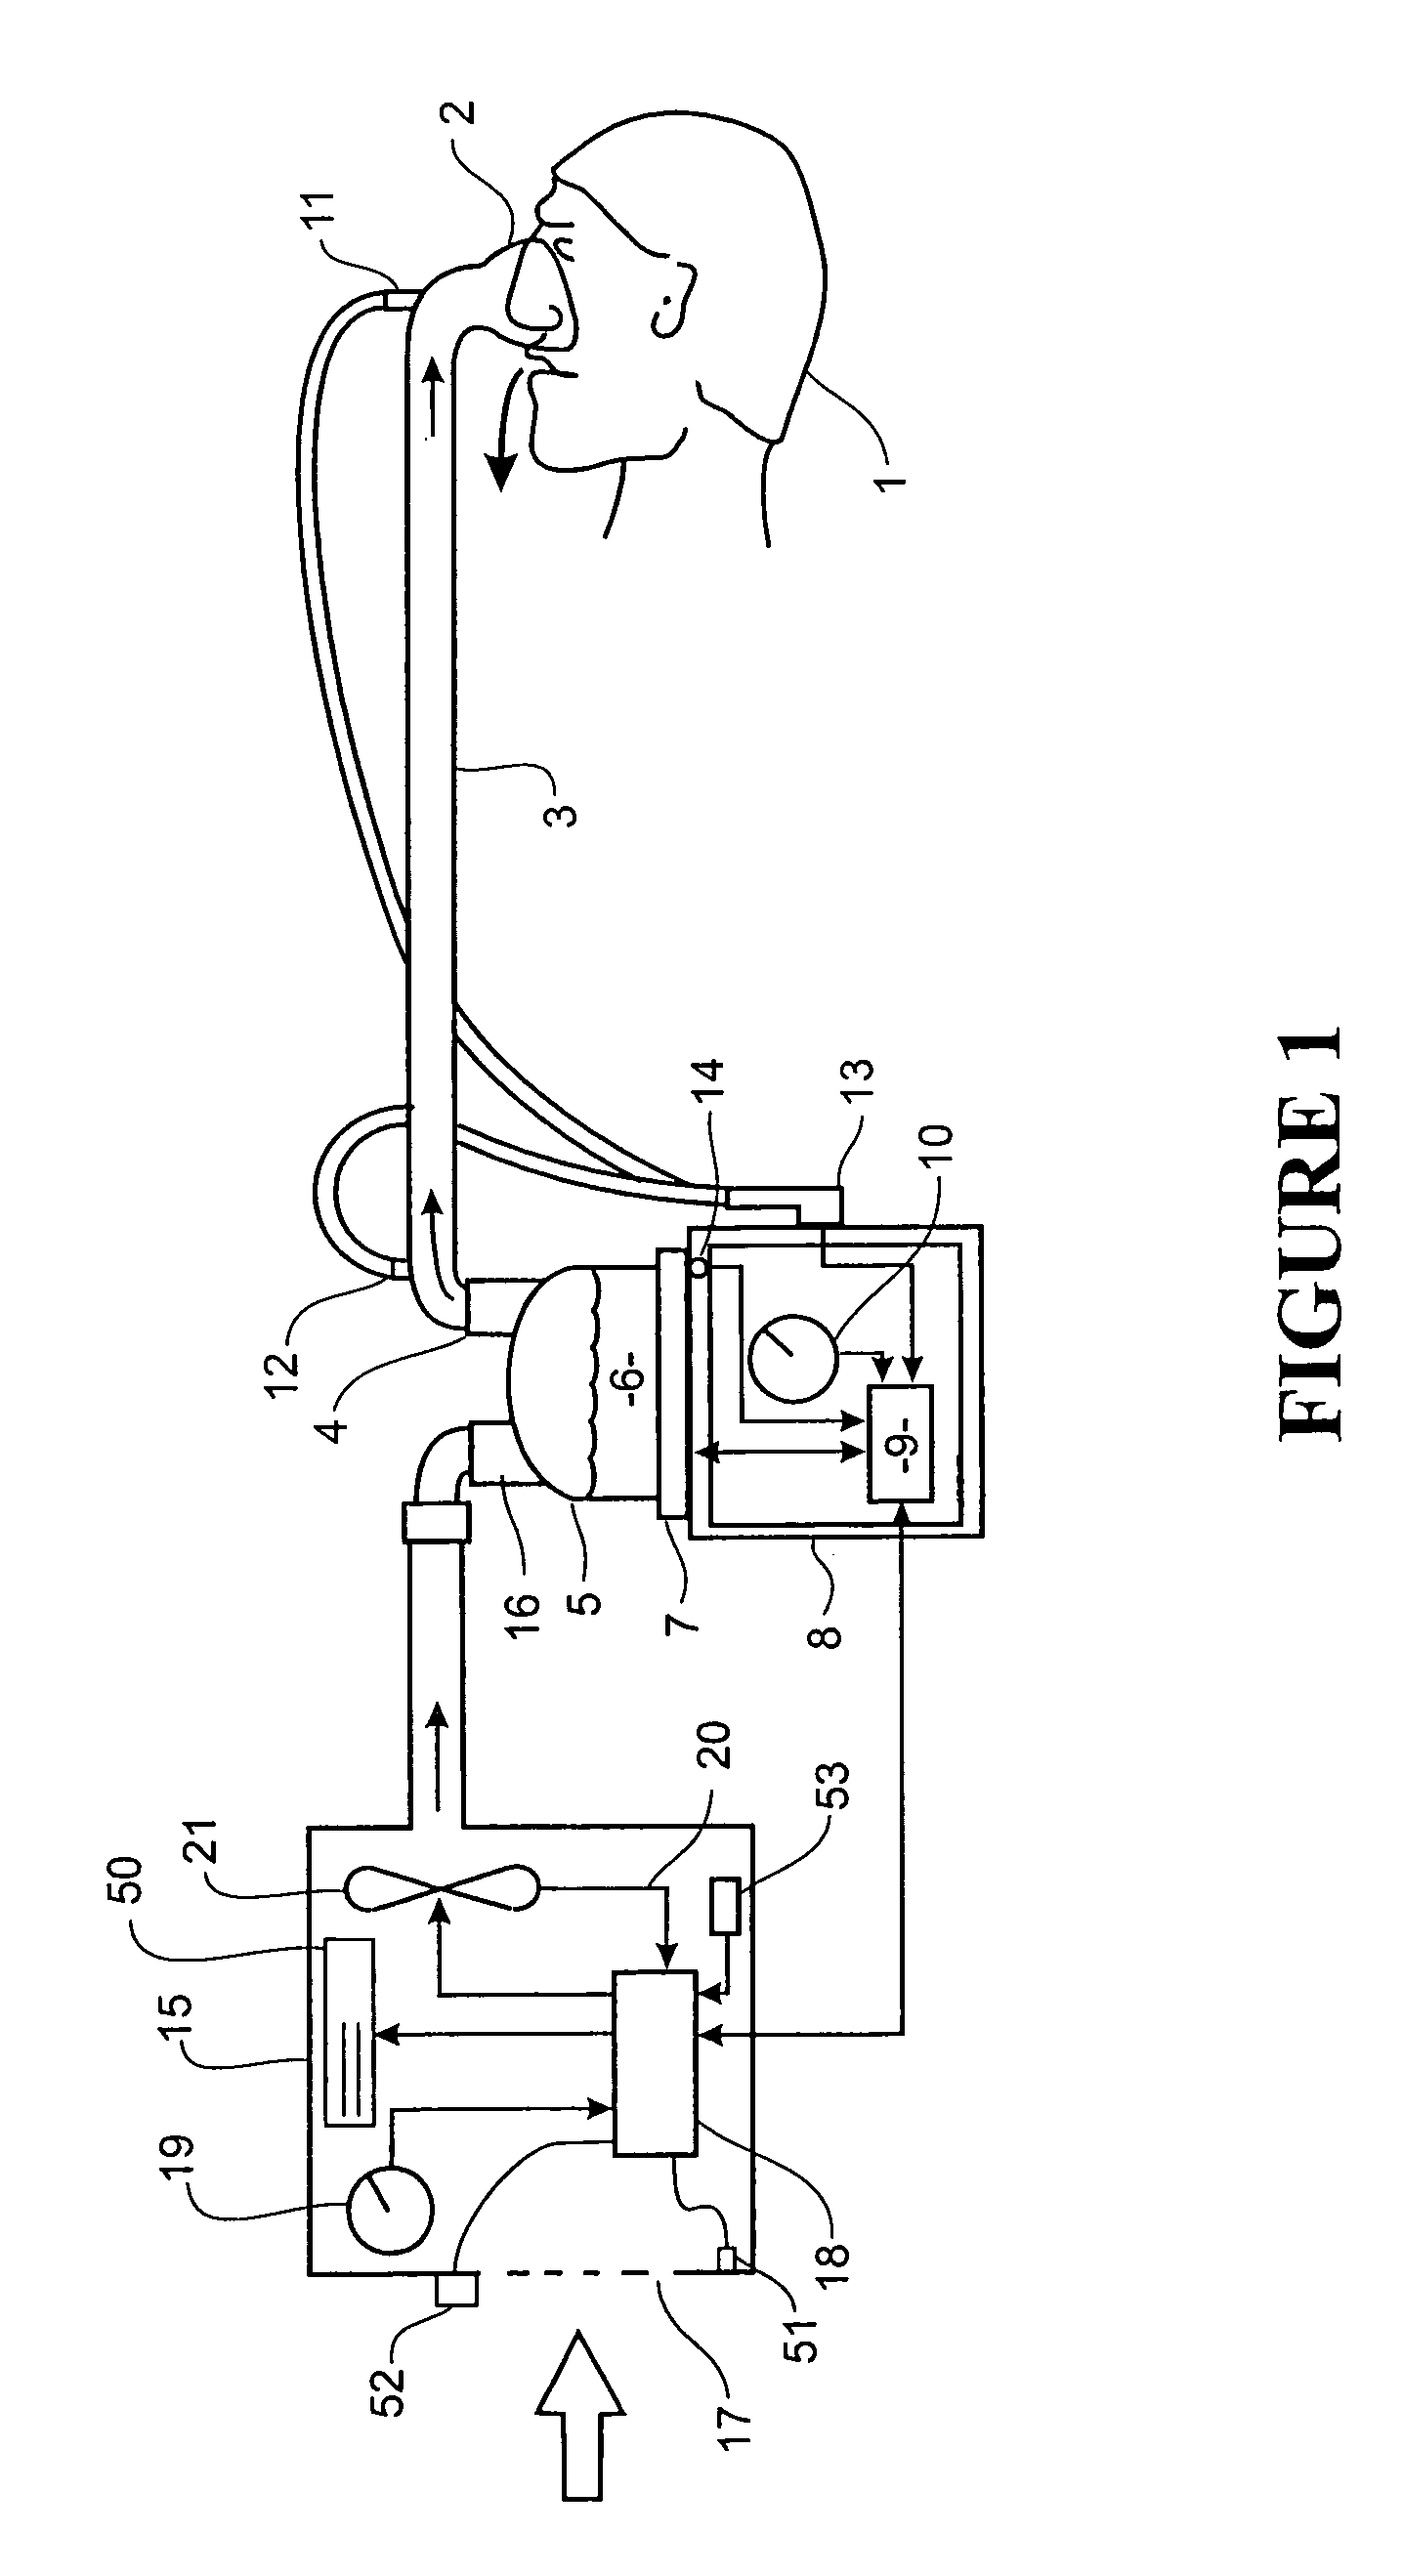 Apparatus for delivery of humidified gases therapy, associated methods and analysis tools